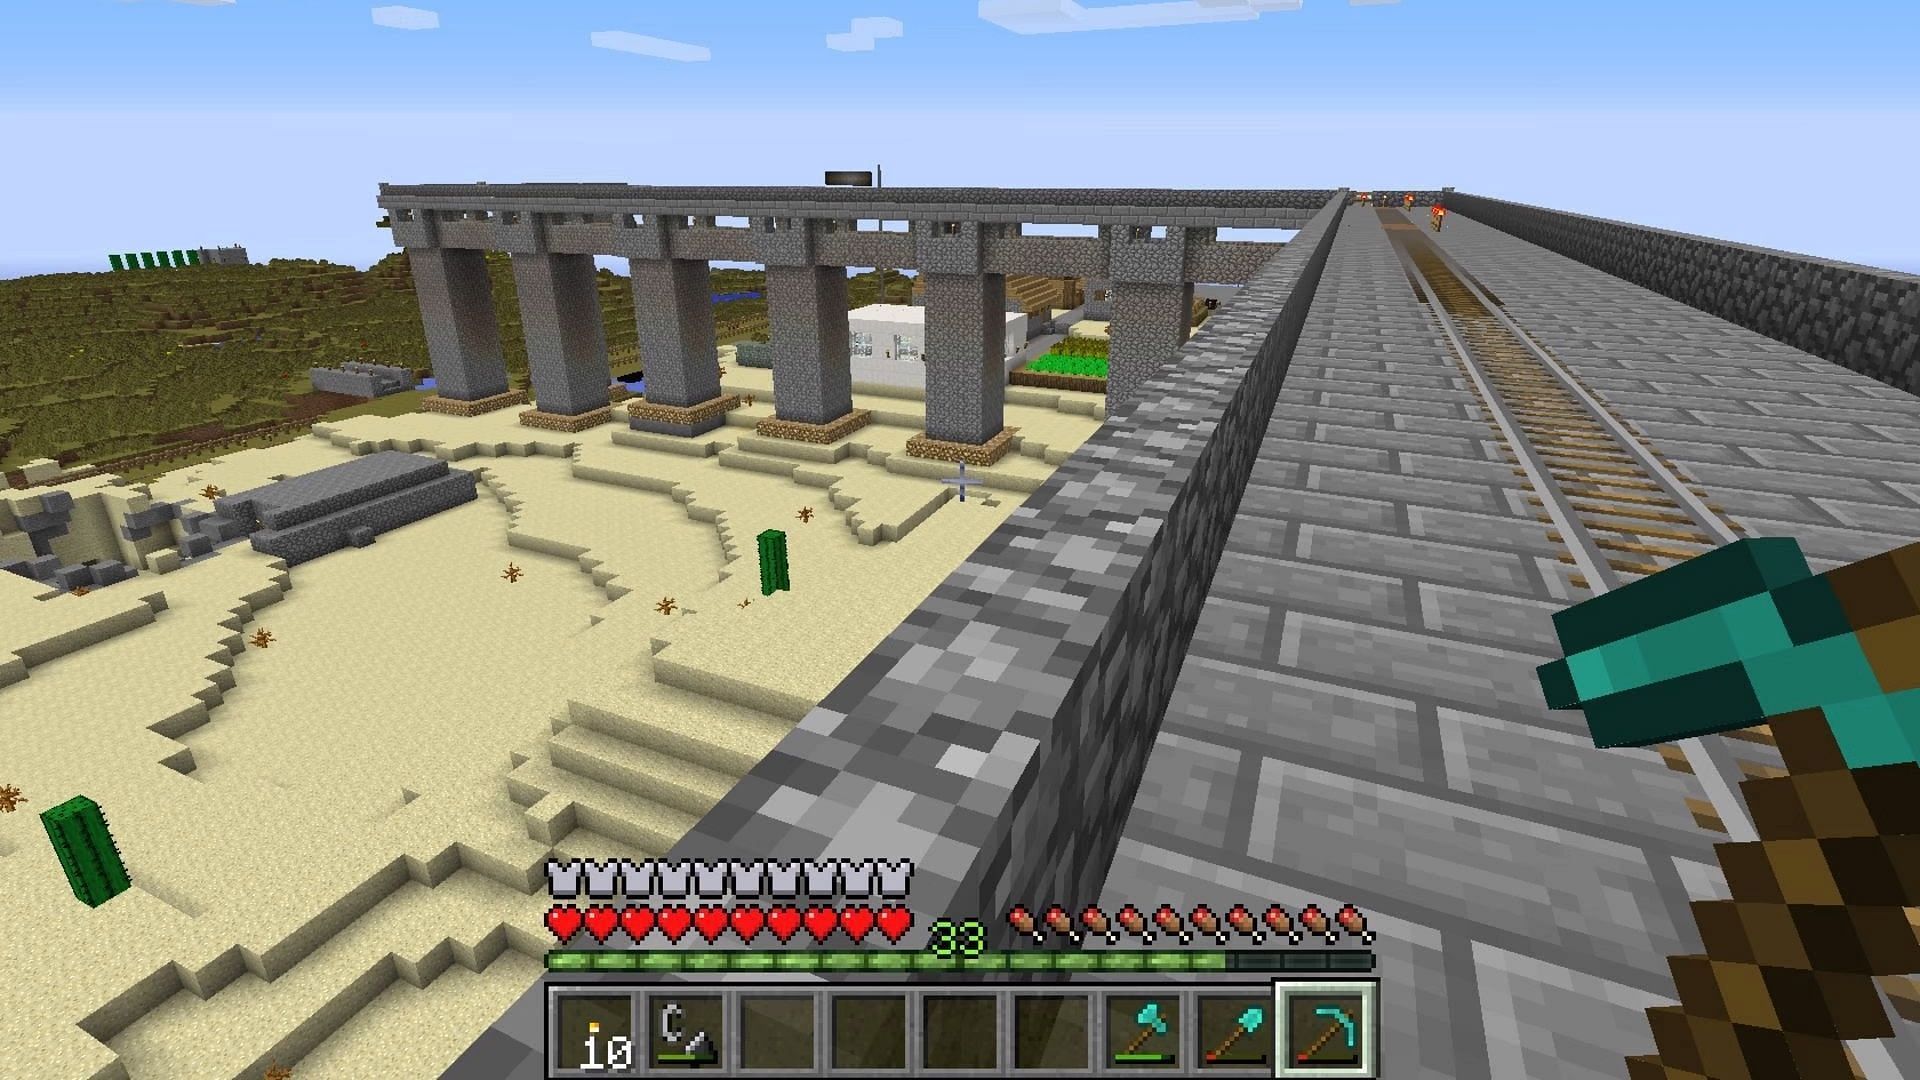 Railway system will help players travel the Minecraft world with ease (Image via Mojang)